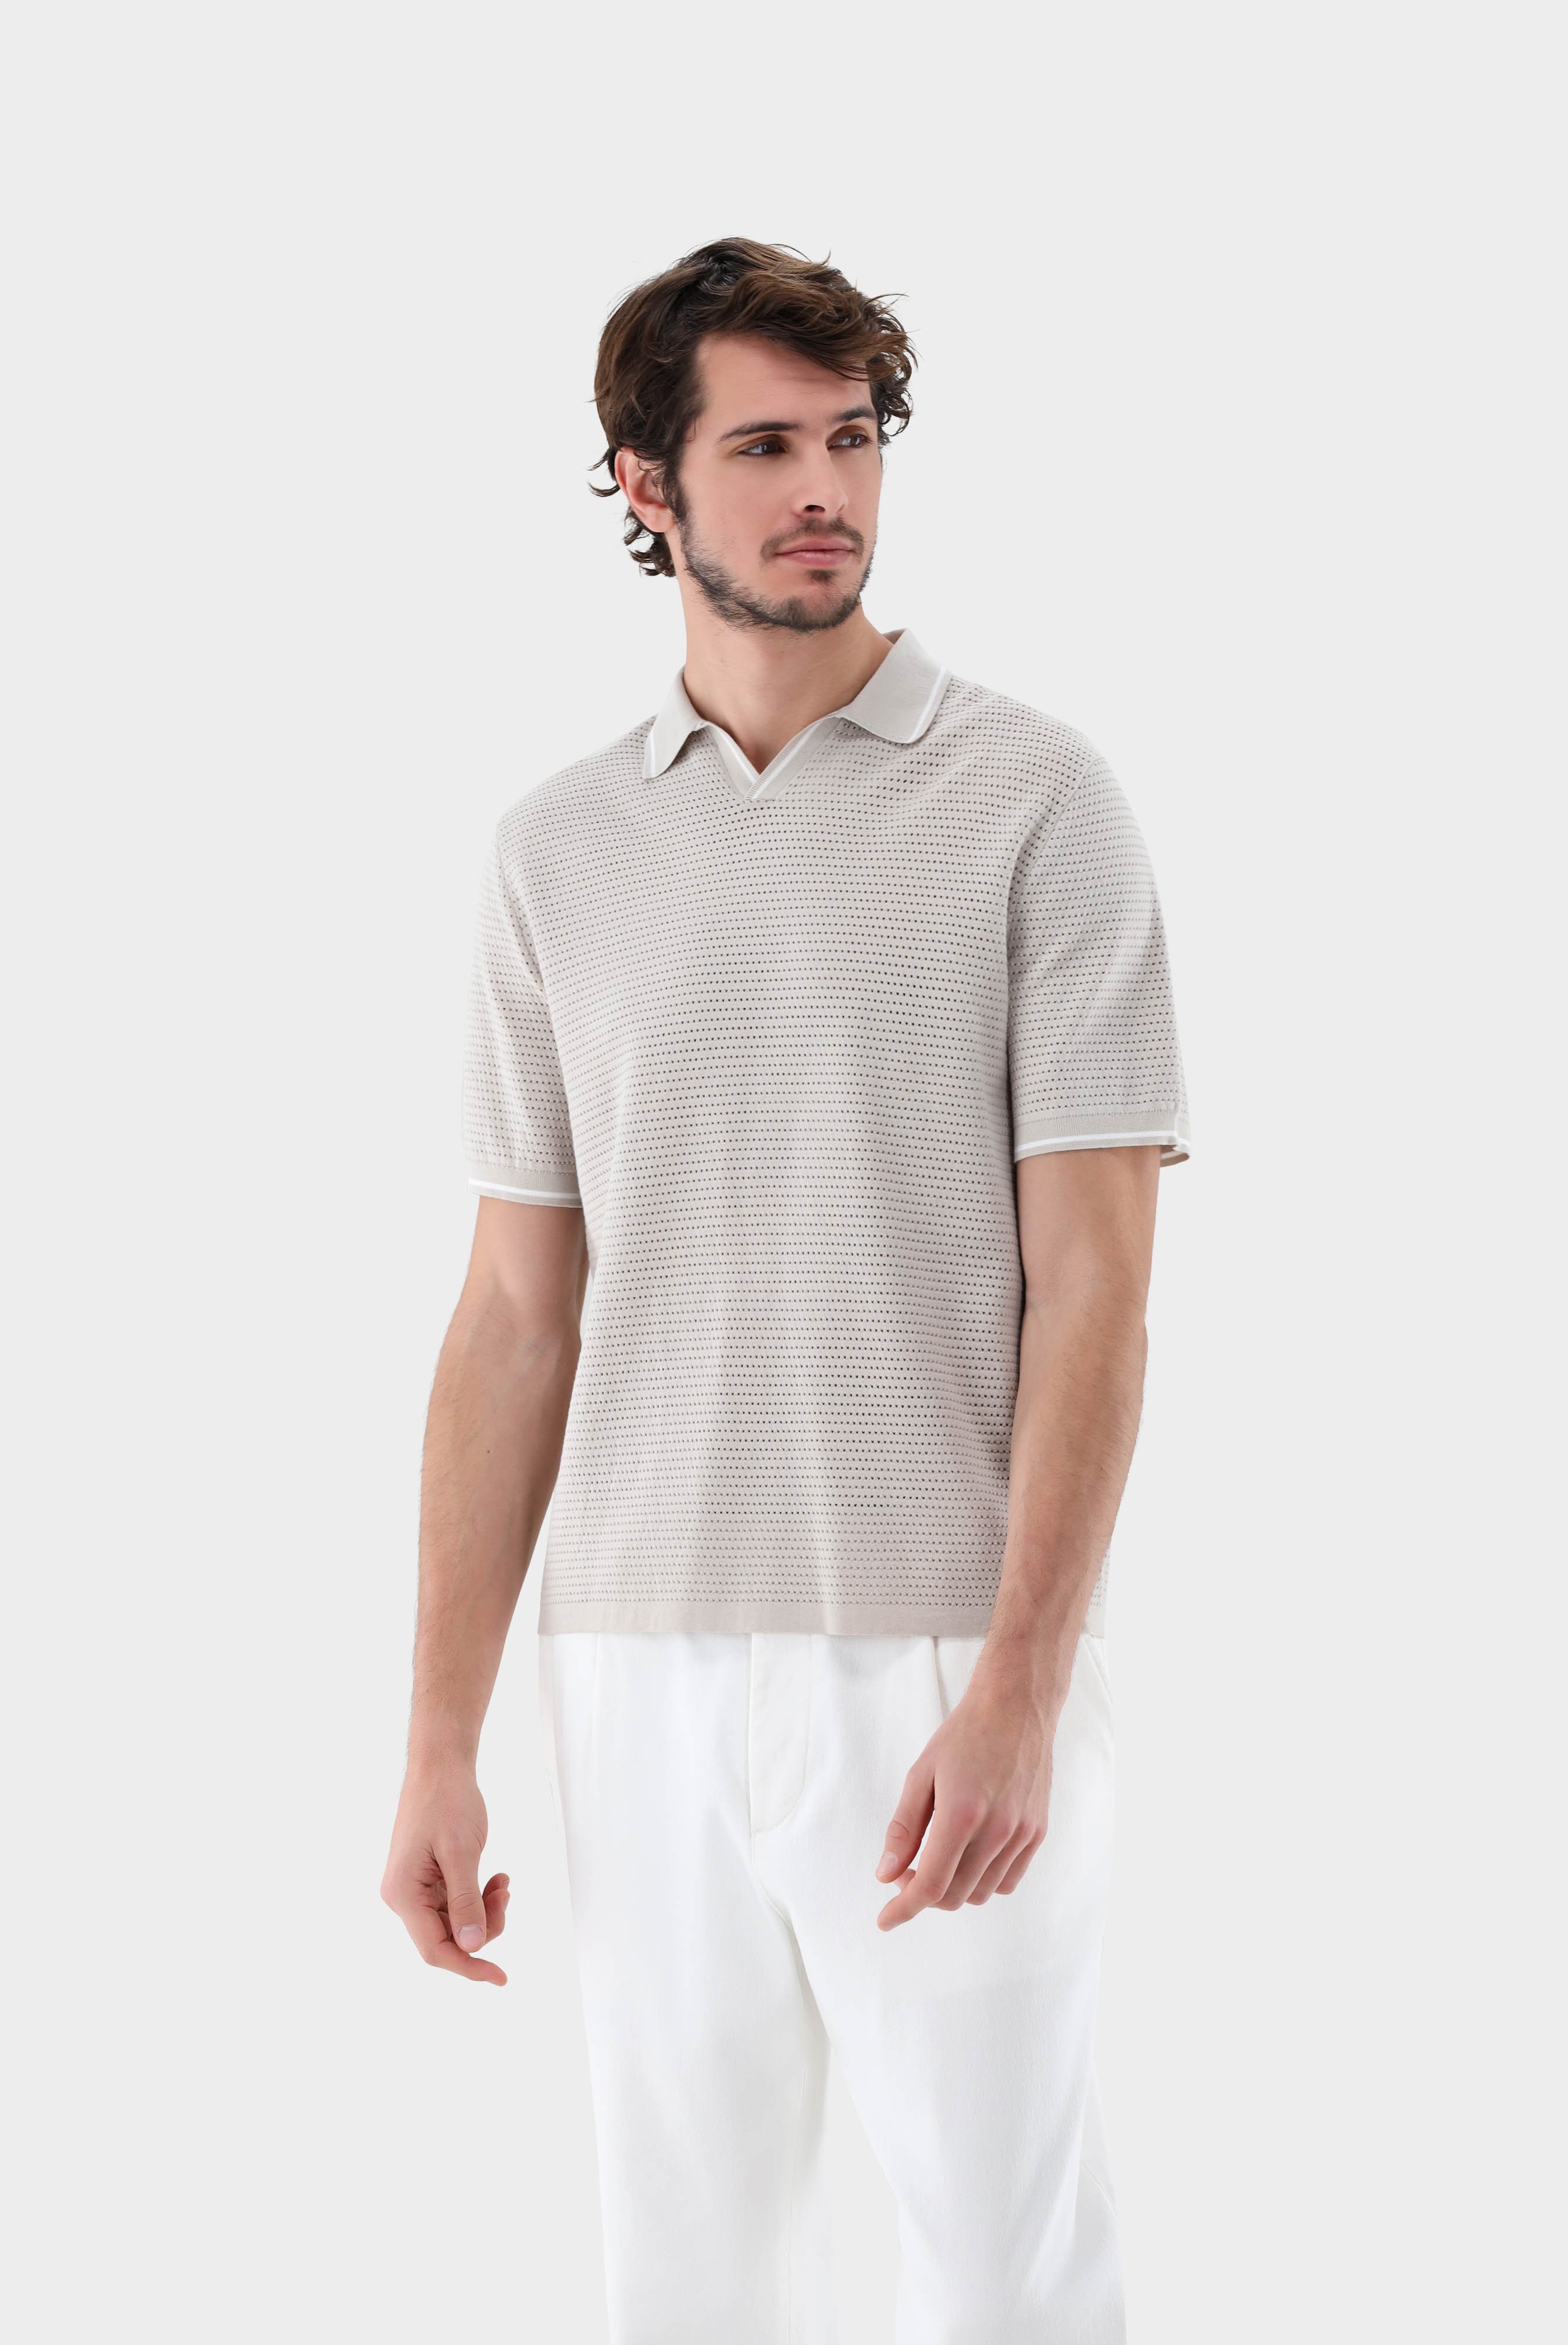 V-neck polo in mesh structure with contrast collar